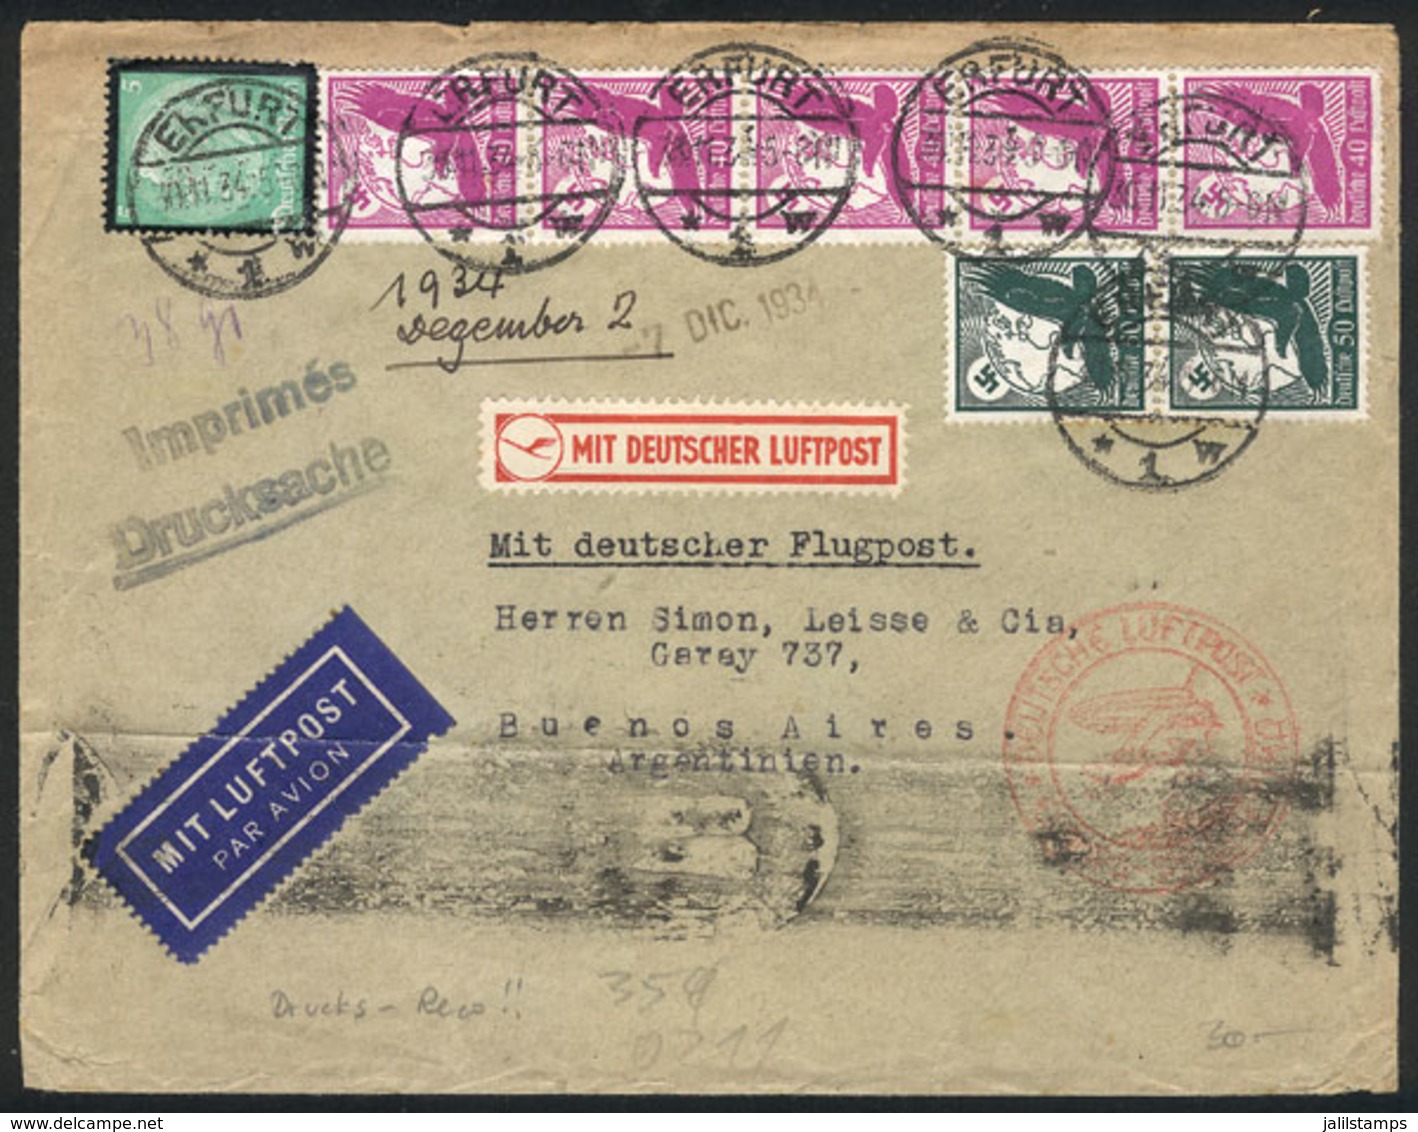 GERMANY: Airmail Cover (it Contained Printed Matter) Sent From Erfurt To Buenos Aires On 30/NO/1934 Franked With 3.05Mk. - Vorphilatelie